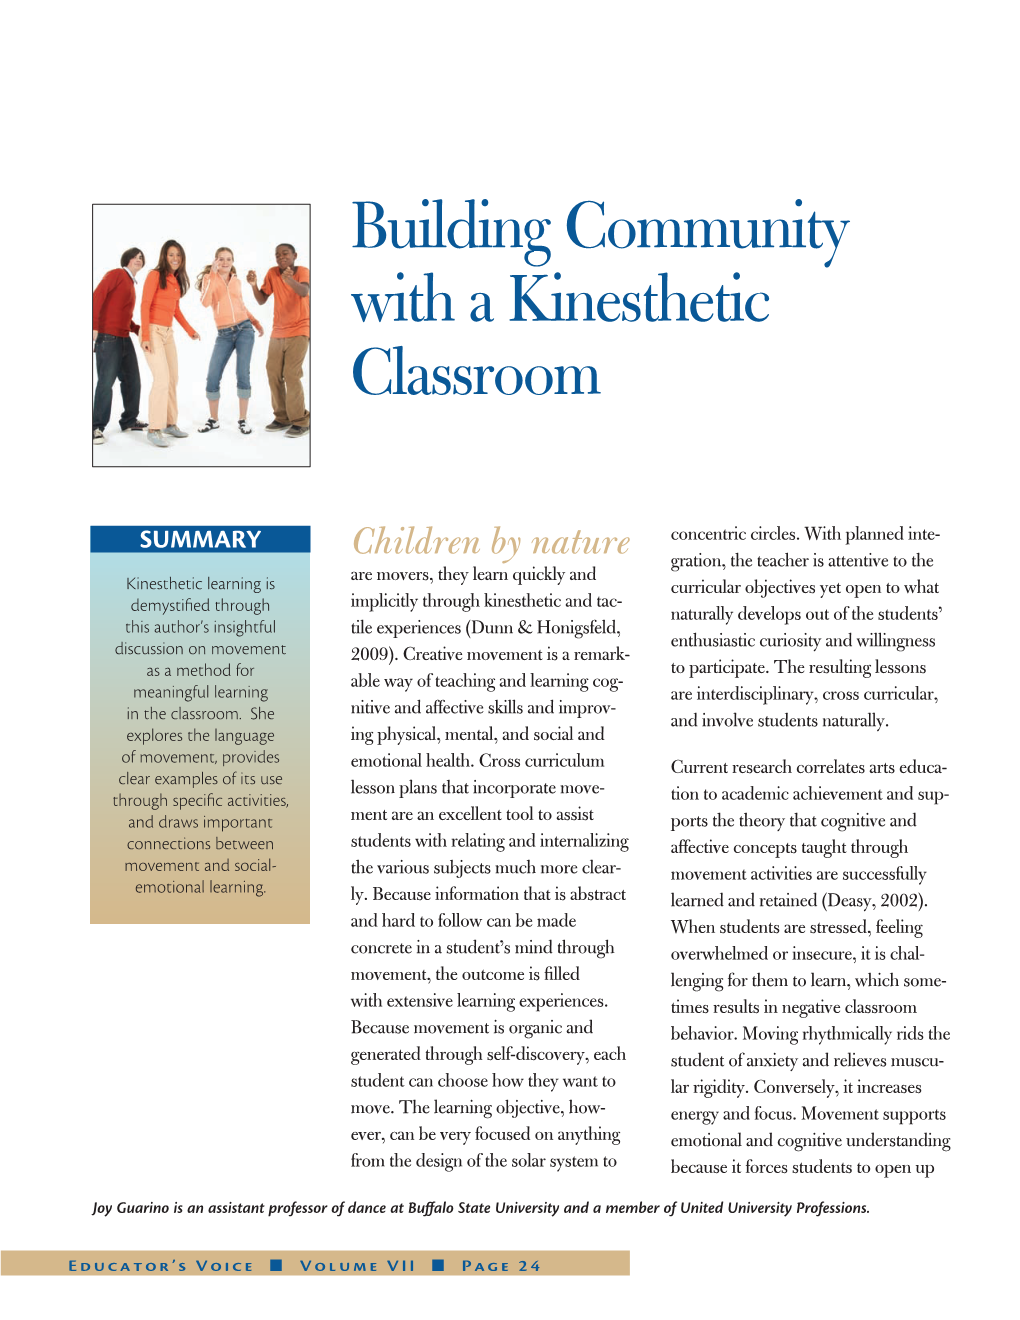 Building Community with a Kinesthetic Classroom